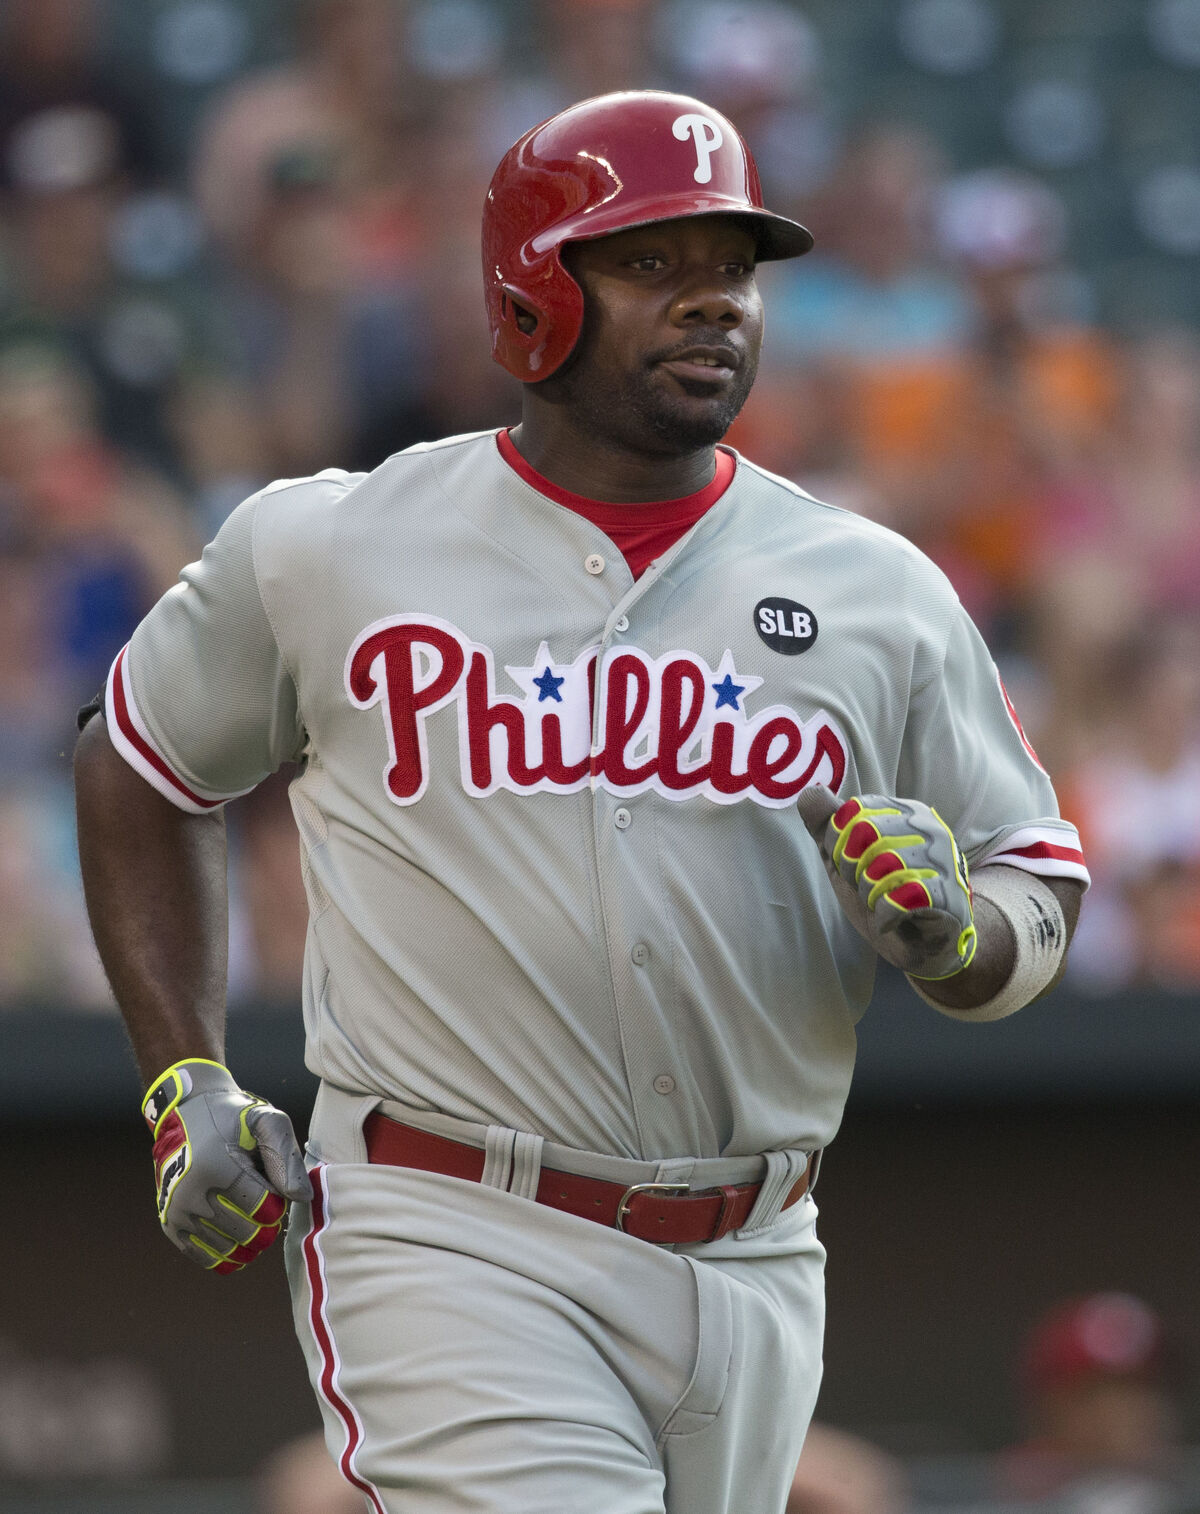 Ryan Howard equals a new record for a first-time eligible player